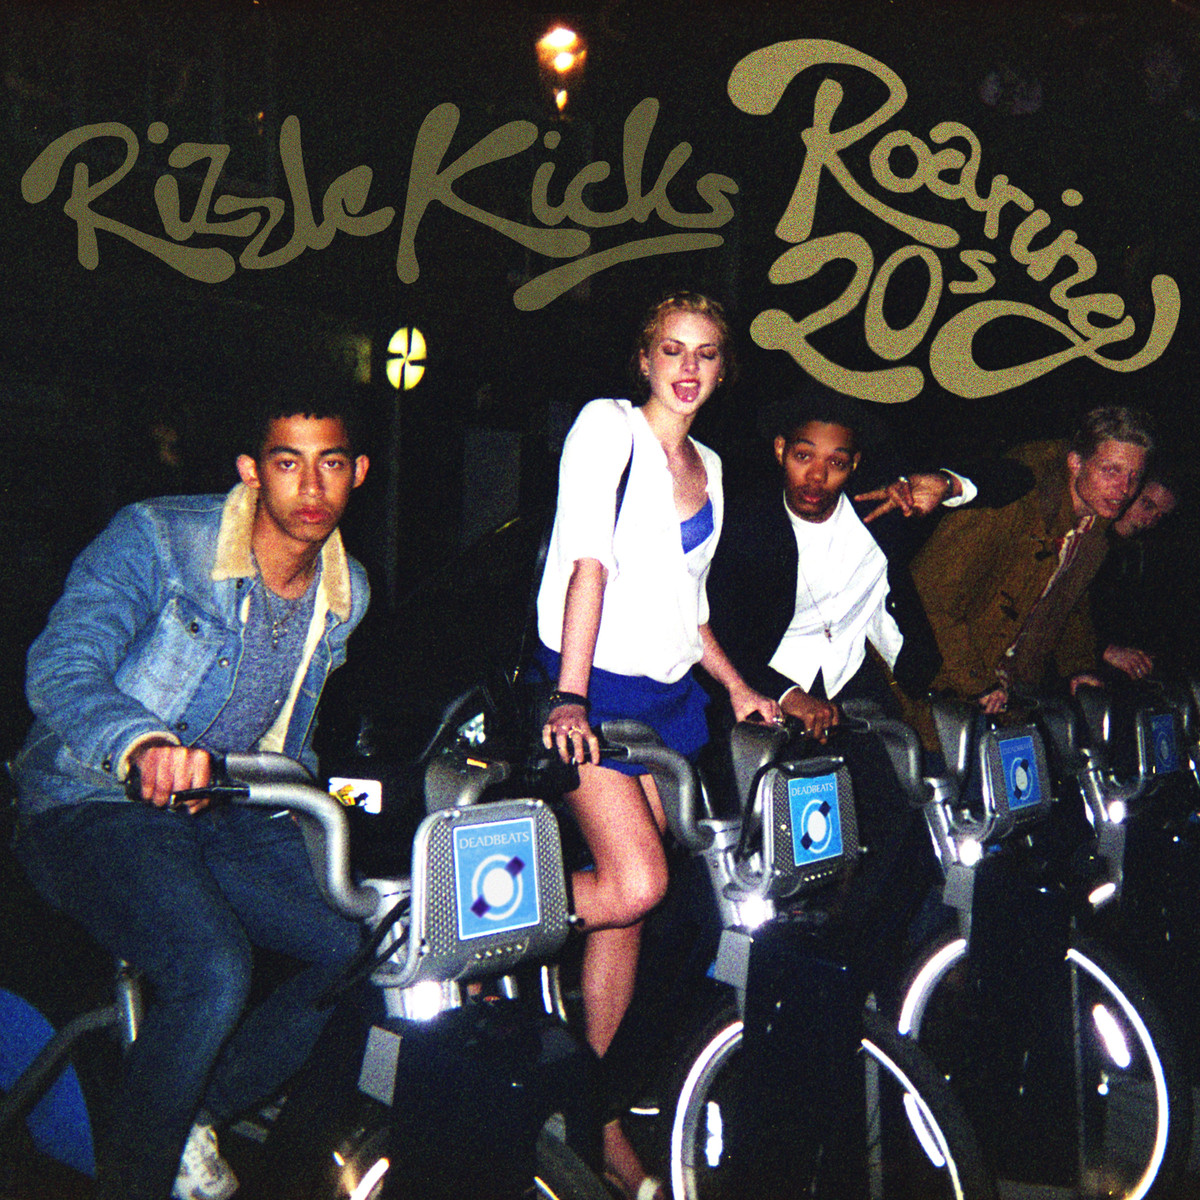 News Added Aug 17, 2013 Roaring 20s is the second studio album by British duo, Rizzle Kicks. The album is due to be released in the United Kingdom on September 2, 2013. The album will be preceded by the release of the official lead single, "Lost Generation", as well as the promotional track "That's Classic". […]